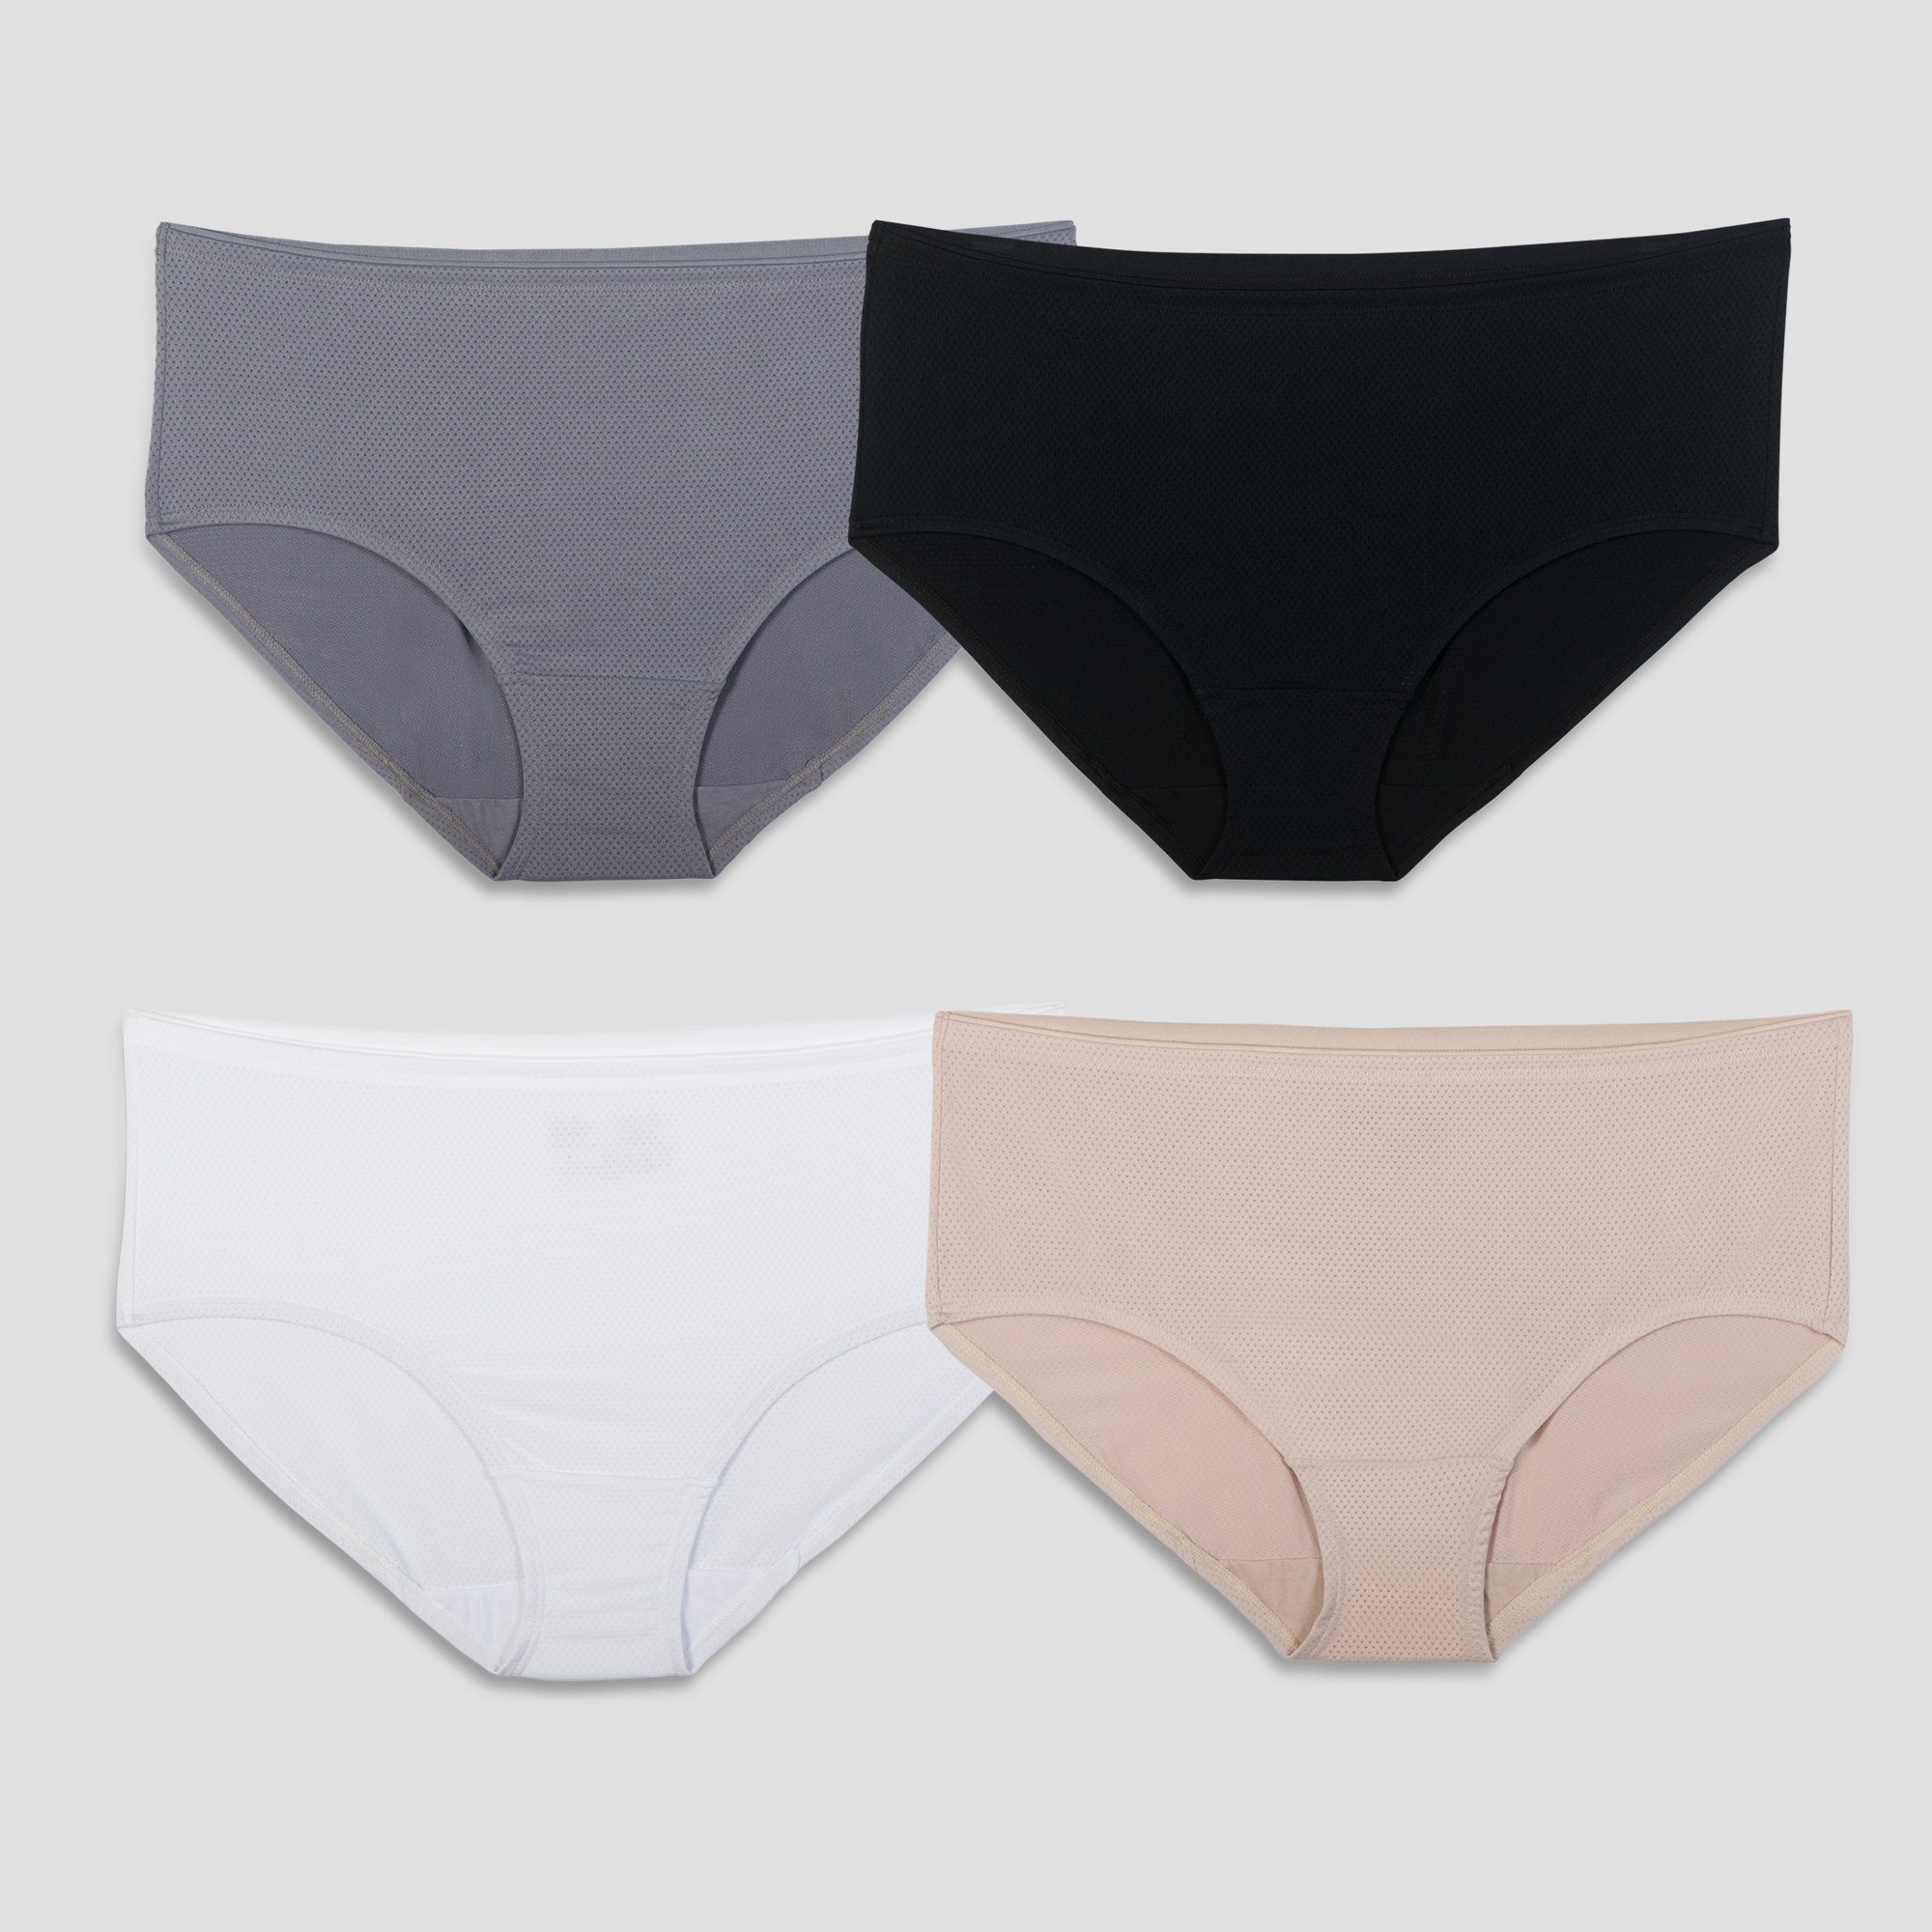 Fruit of the Loom Women's Breathable Underwear 6 Pack